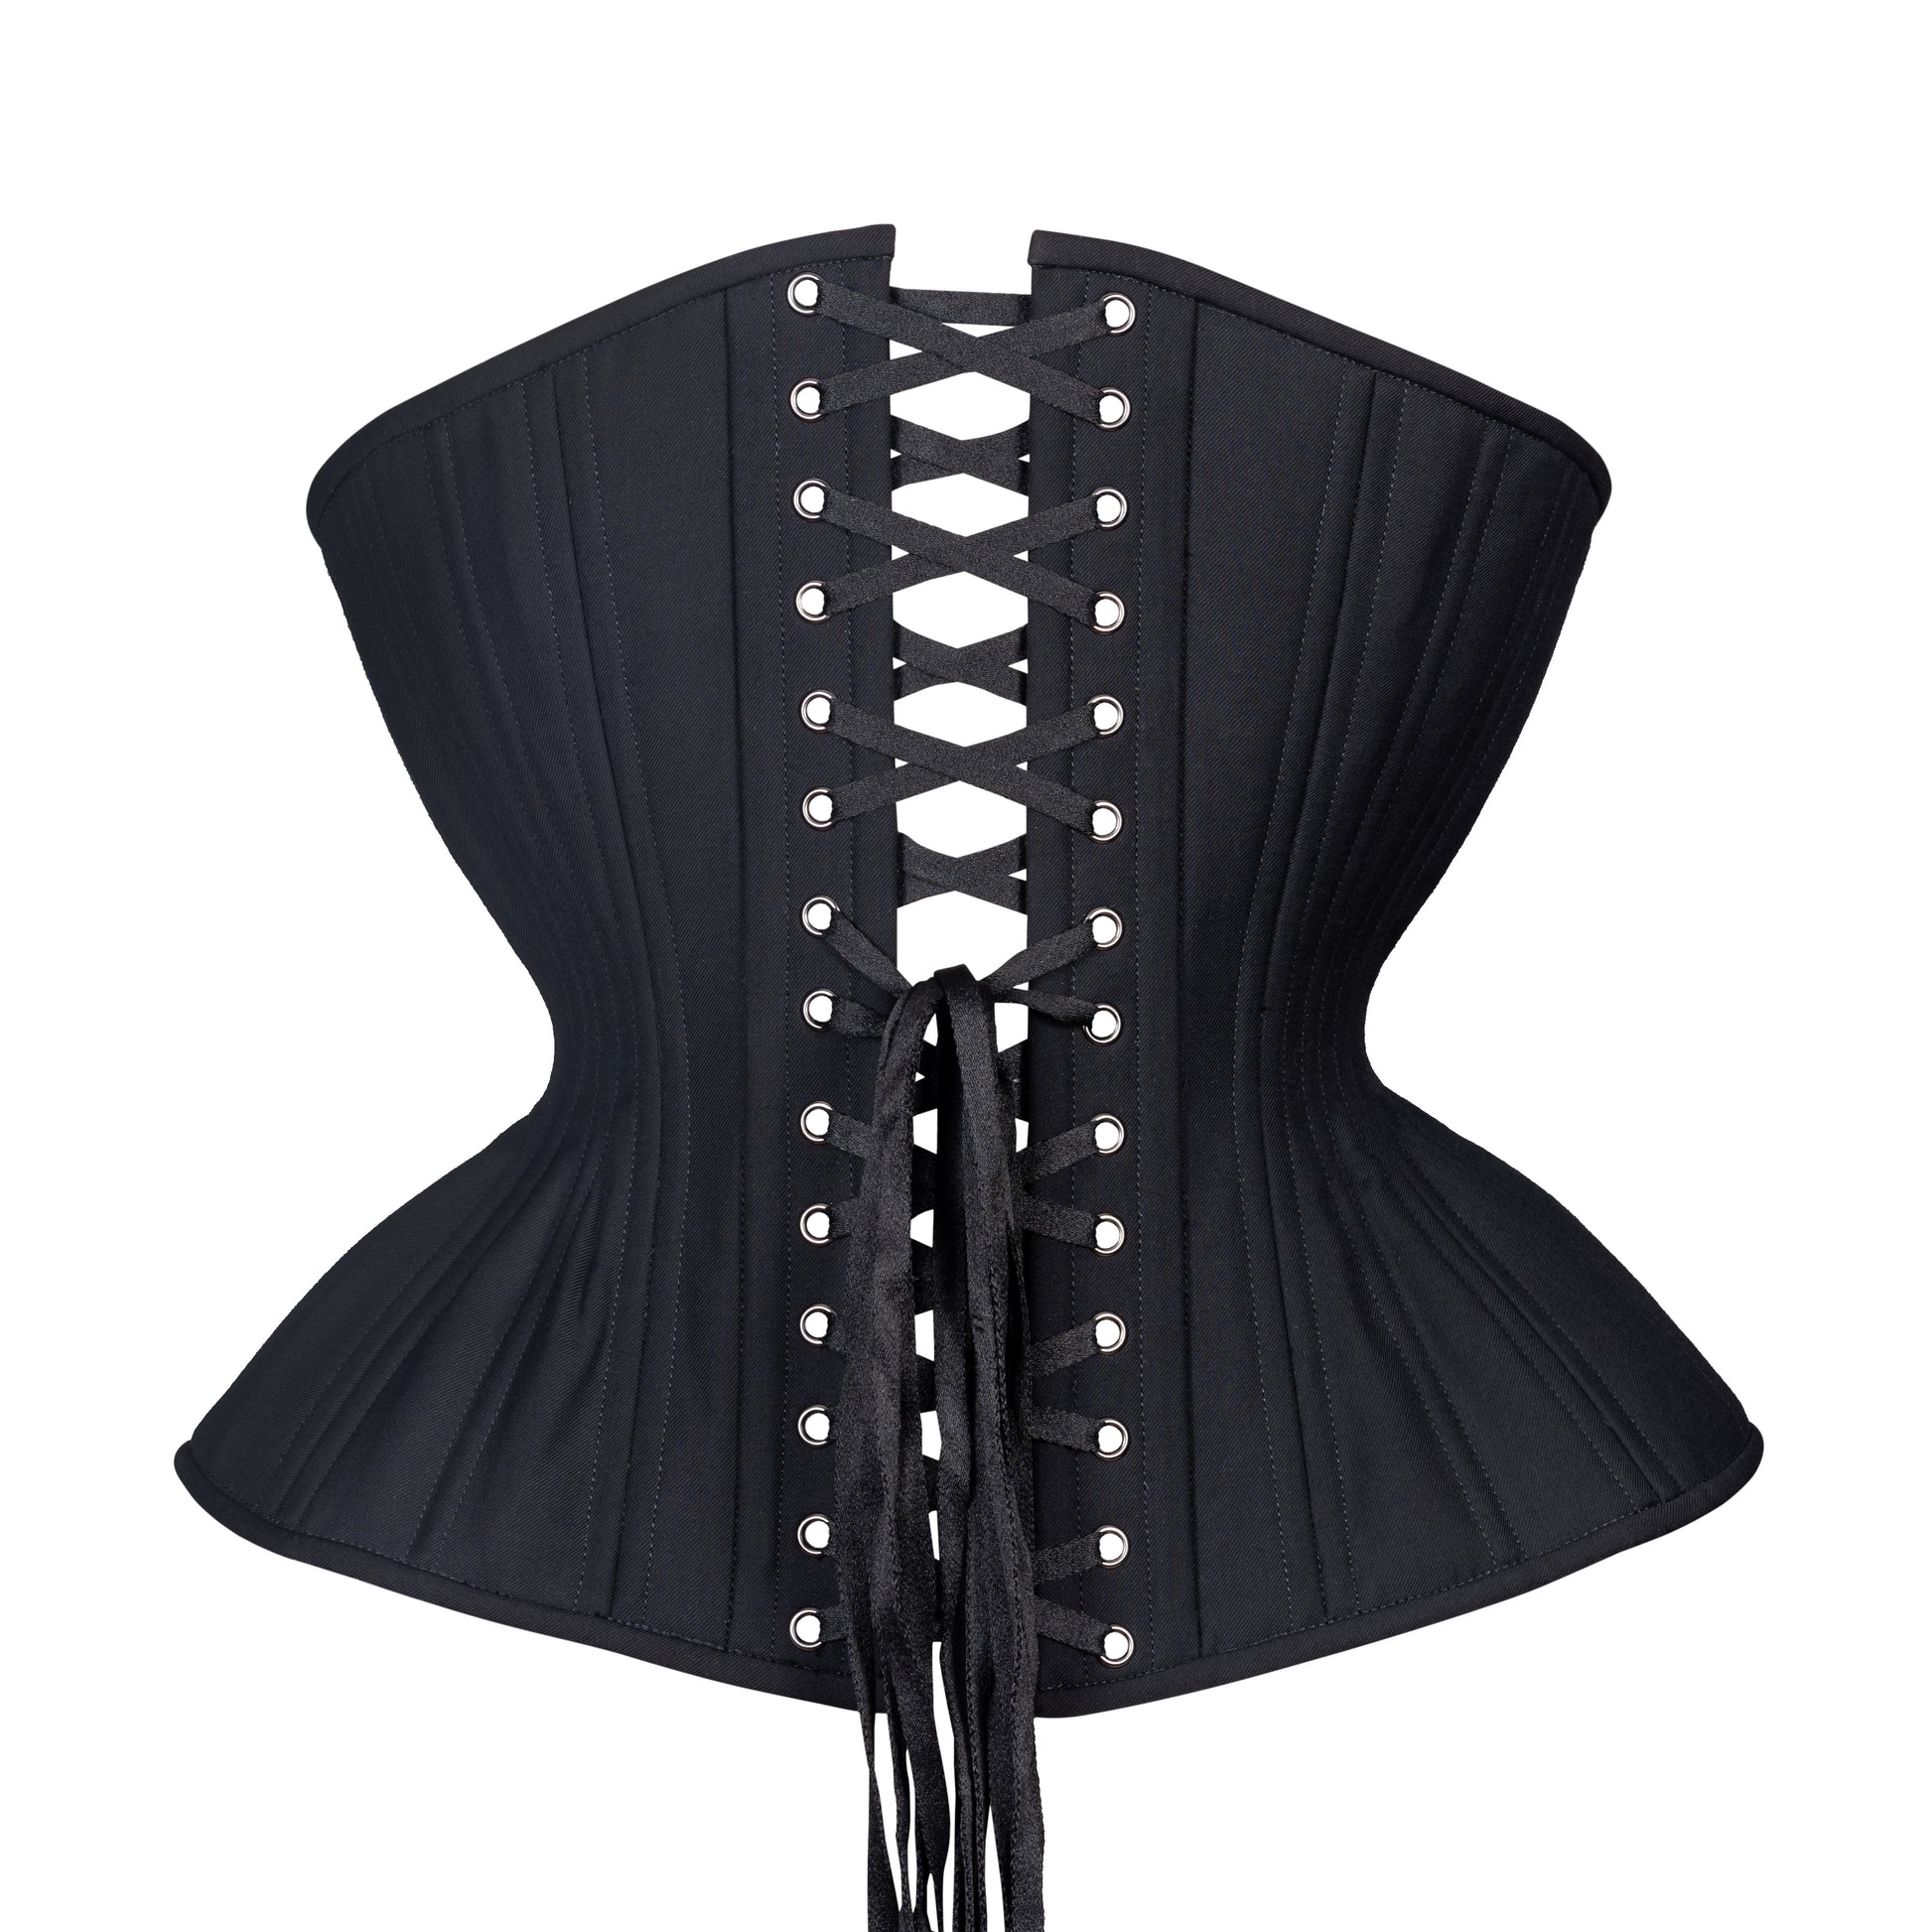 Looking for a 30 or 32 longline corset to control my muffin top and